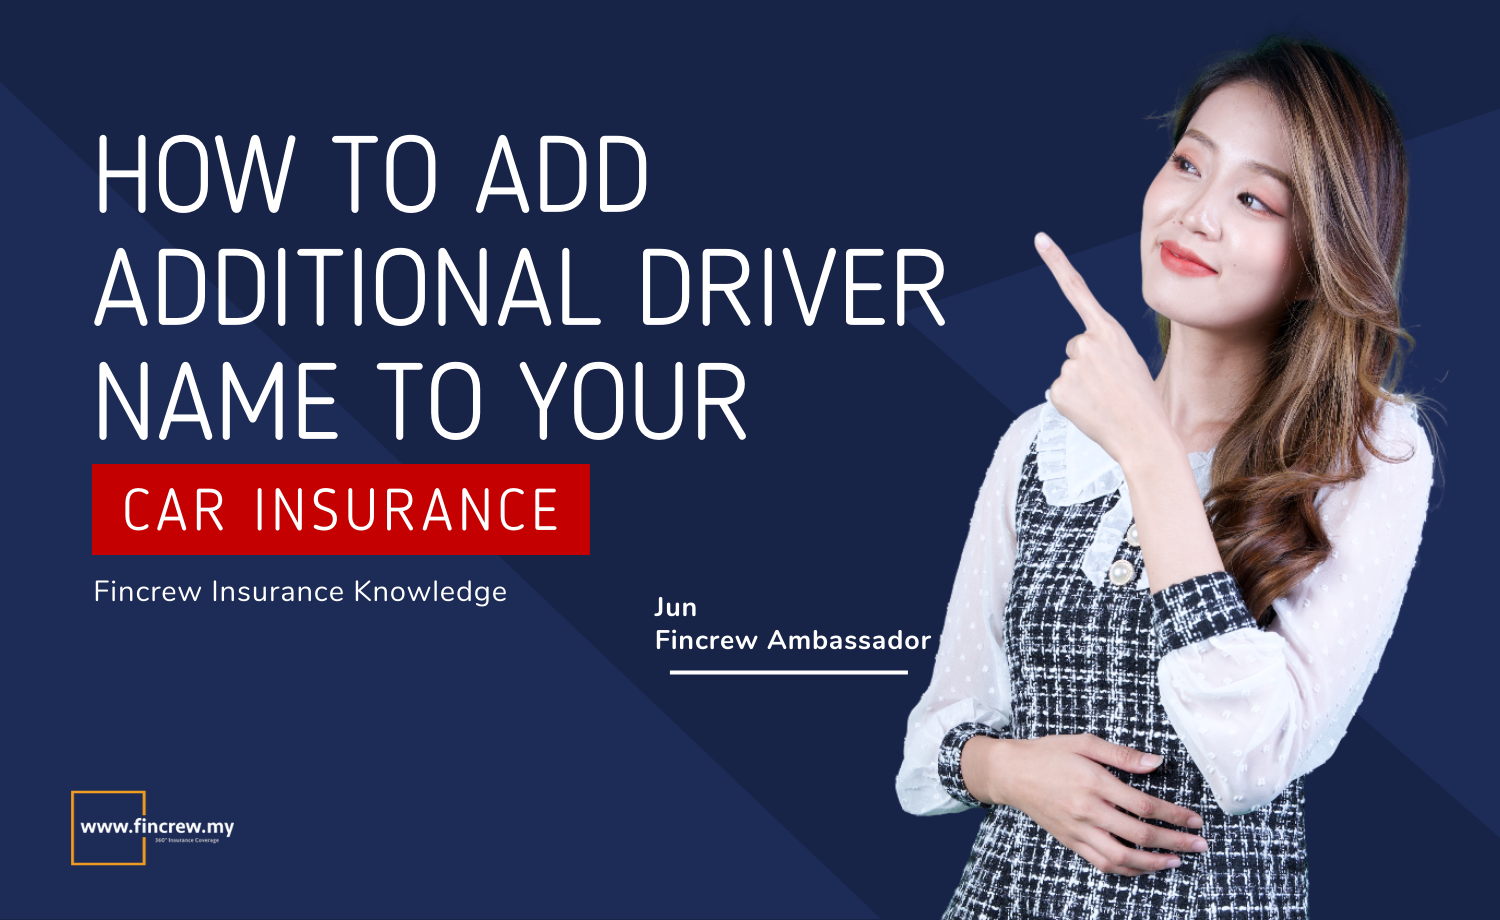 Additional Driver Name To Your Car Insurance Blog Featured Image